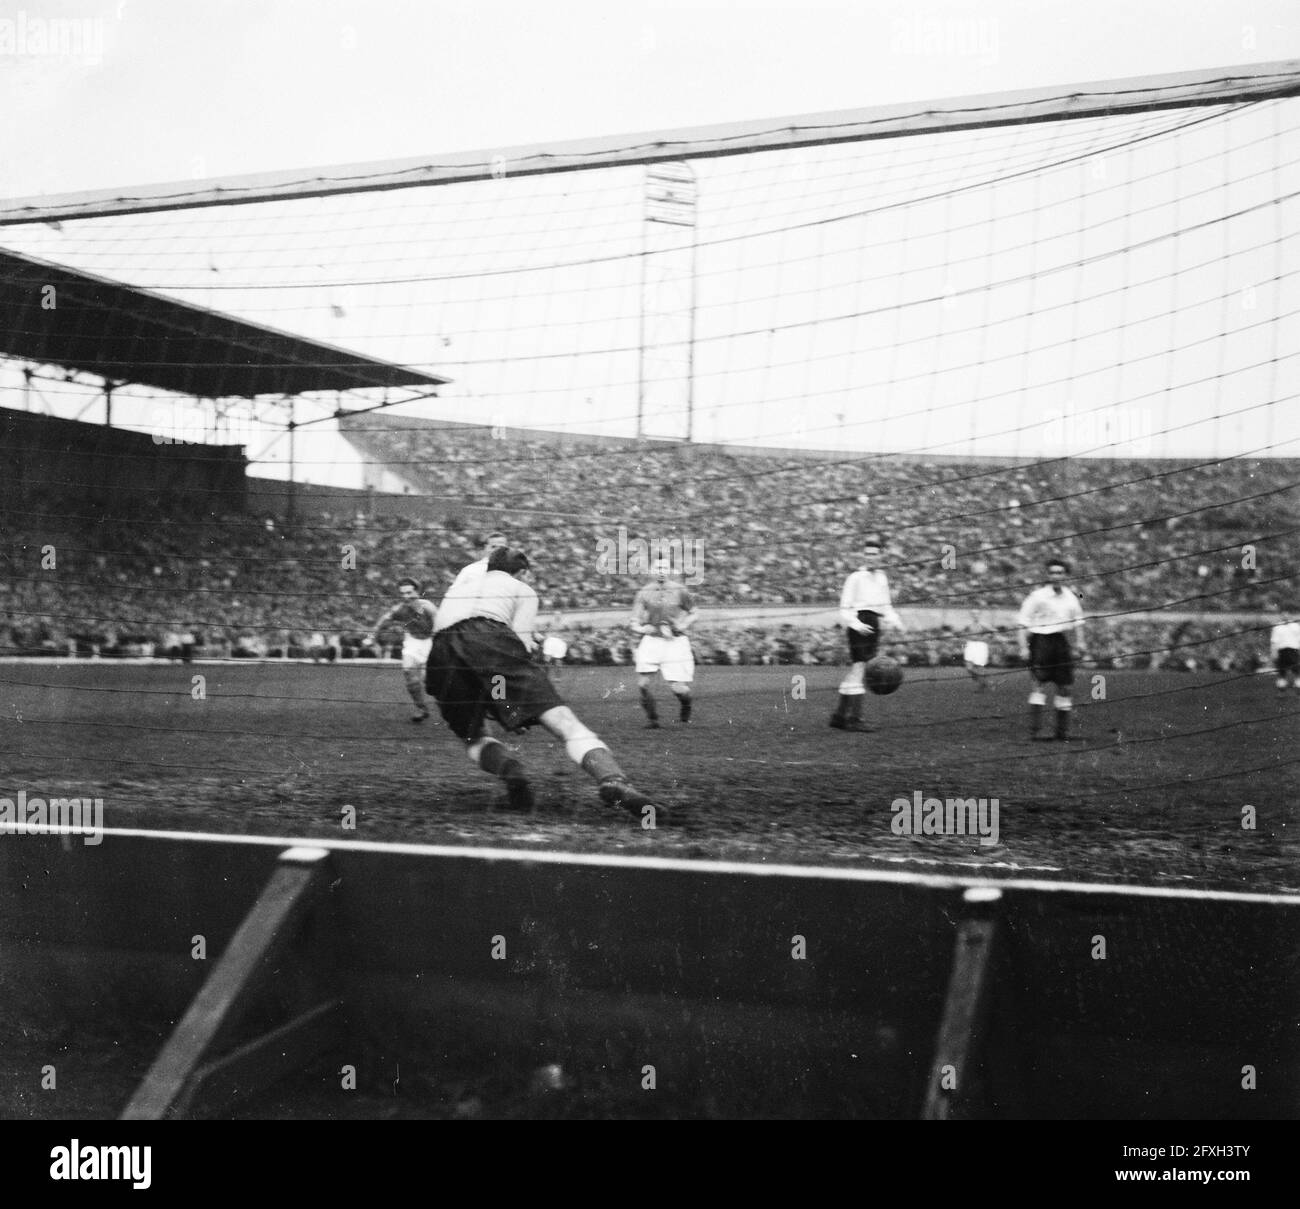 Soccer Netherlands against England, March 26, 1952, sports, soccer, The Netherlands, 20th century press agency photo, news to remember, documentary, historic photography 1945-1990, visual stories, human history of the Twentieth Century, capturing moments in time Stock Photo